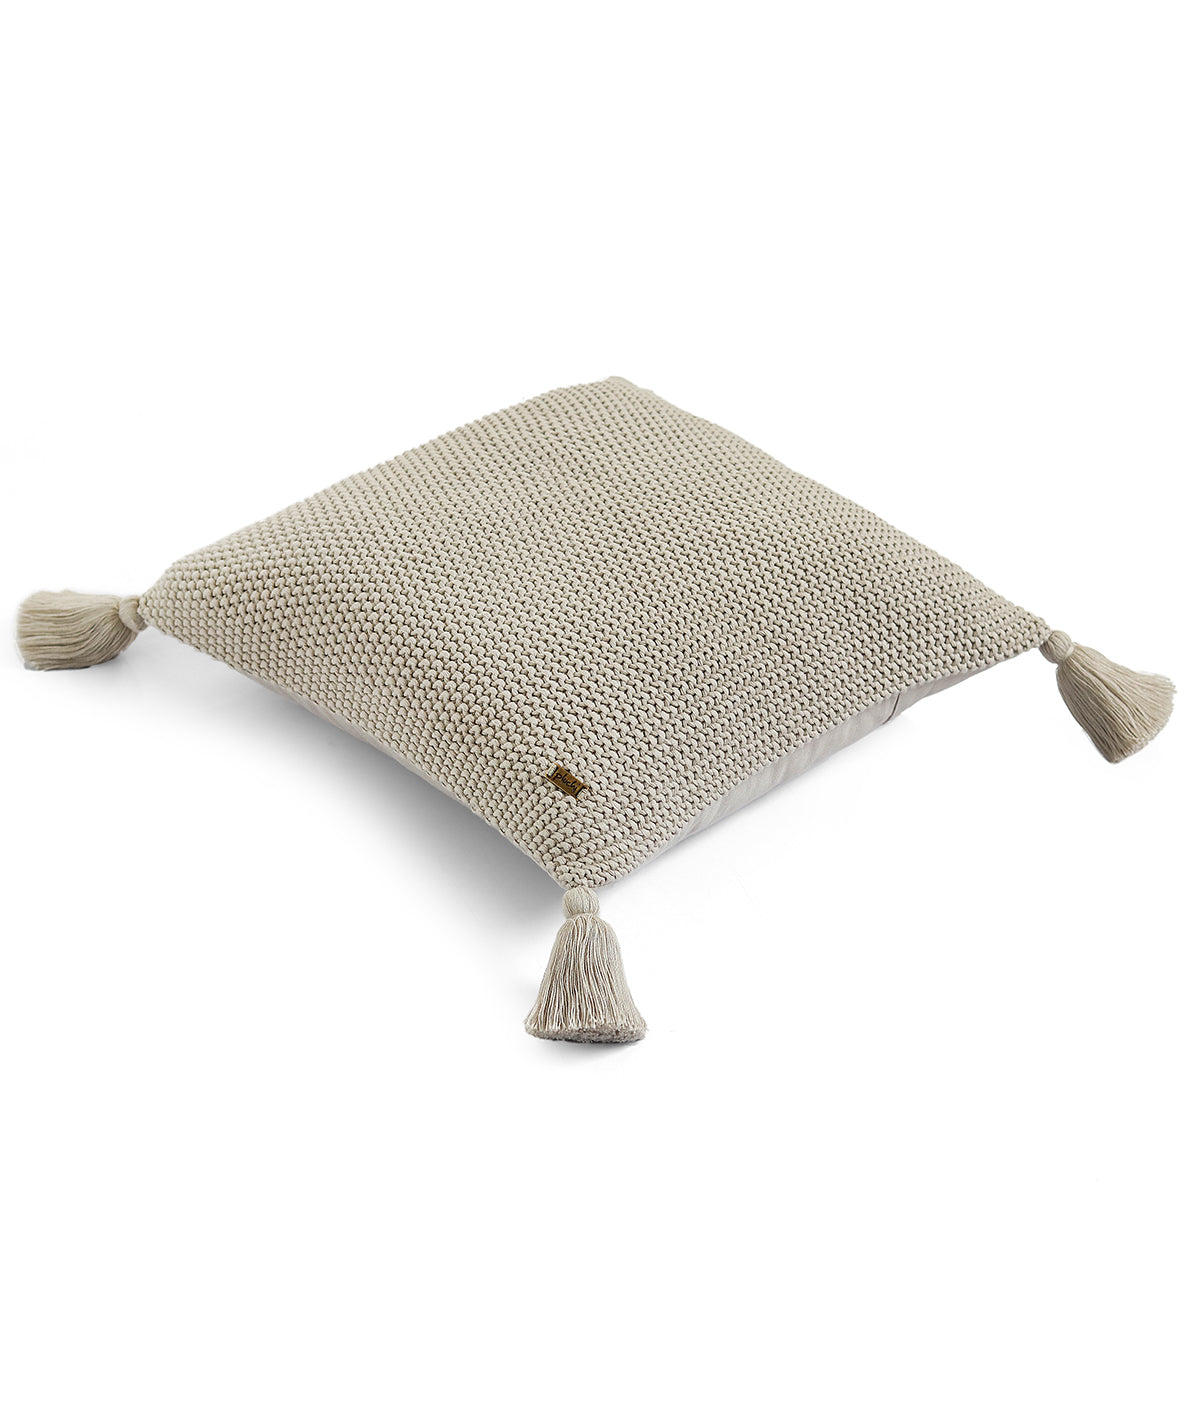 Moss Knit Cotton Knitted Decorative Cushion Cover (Pale Whisper) (16" X 16")